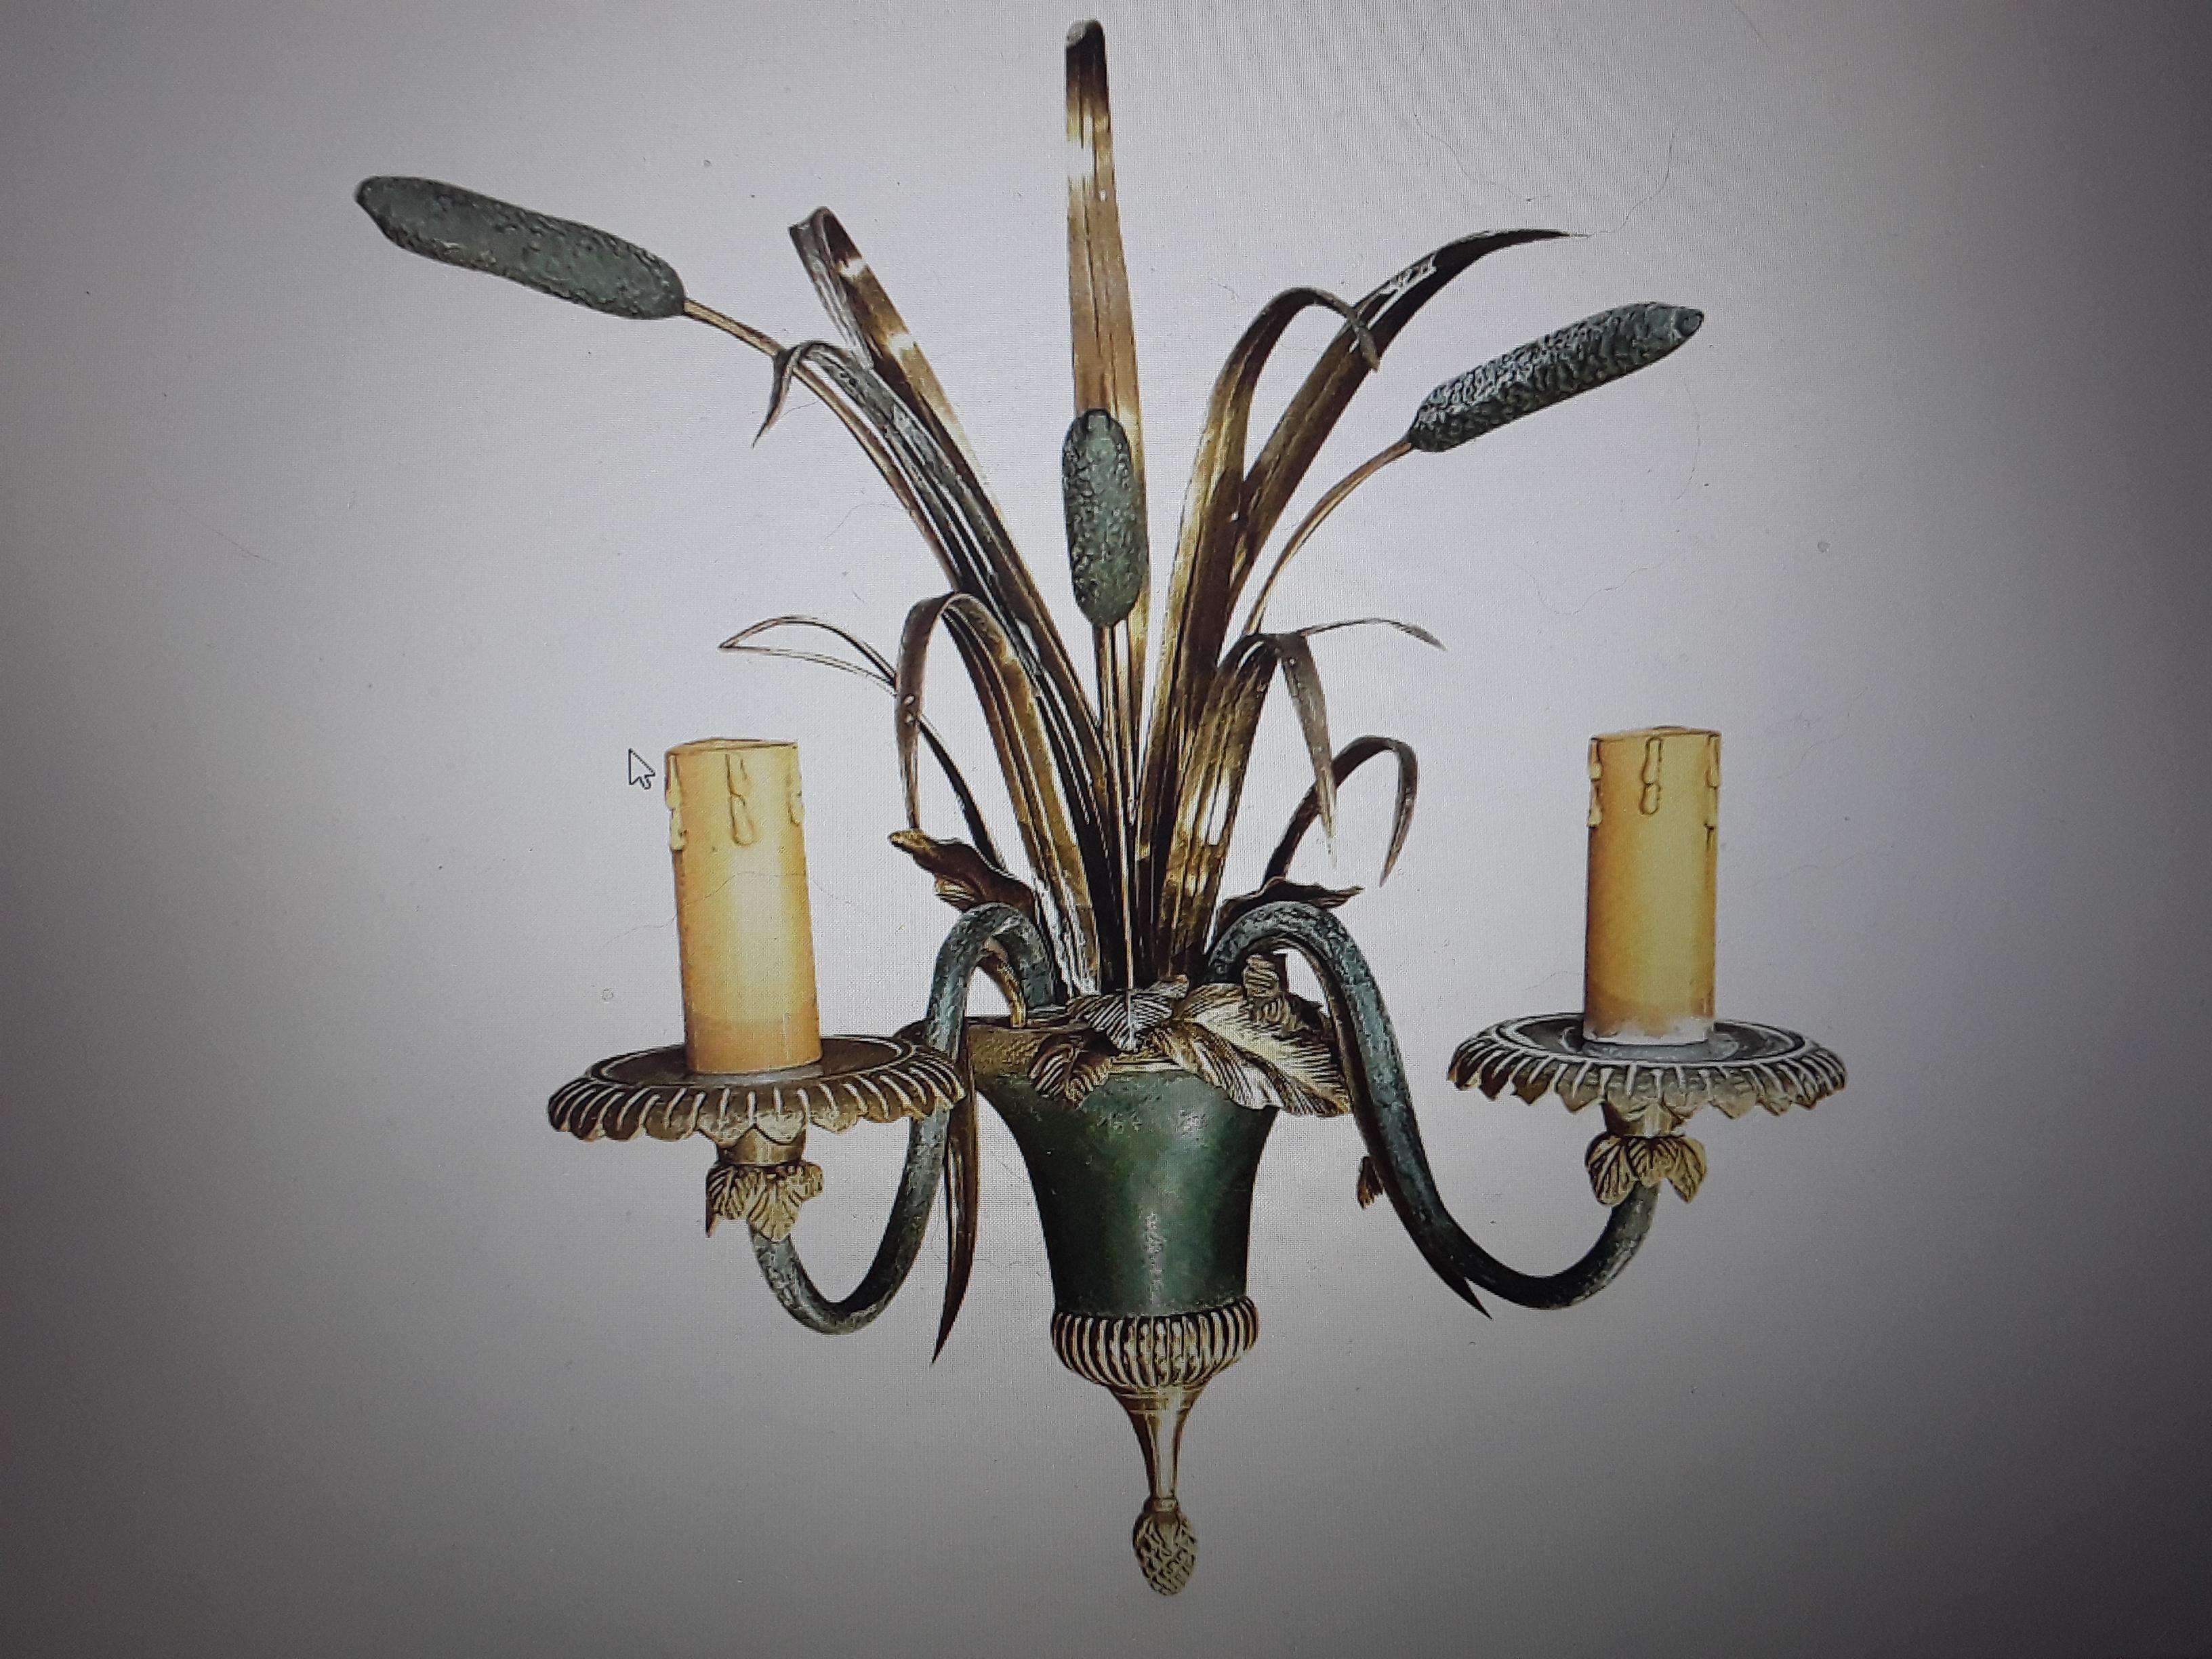 1940s French Regency Gilt &Patinated Bronze Floral Wall Sconce by Maison Charles For Sale 12